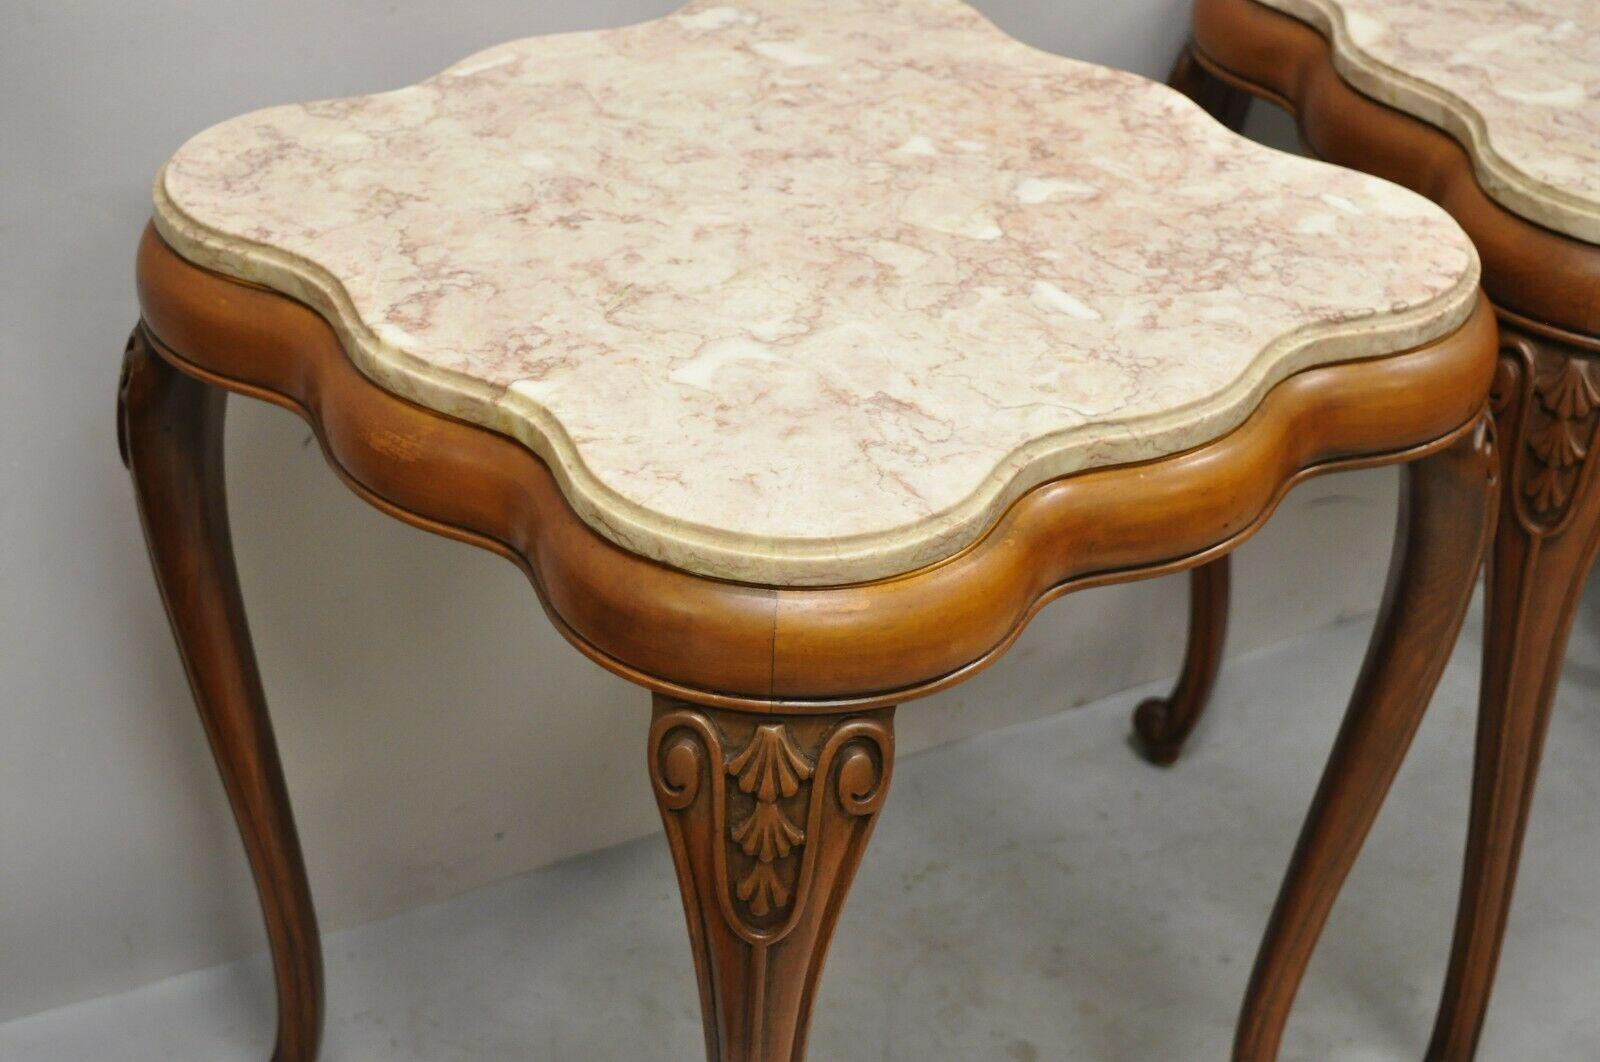 American Vintage French Provincial Pink Marble Top Wood Base End Tables - a Pair